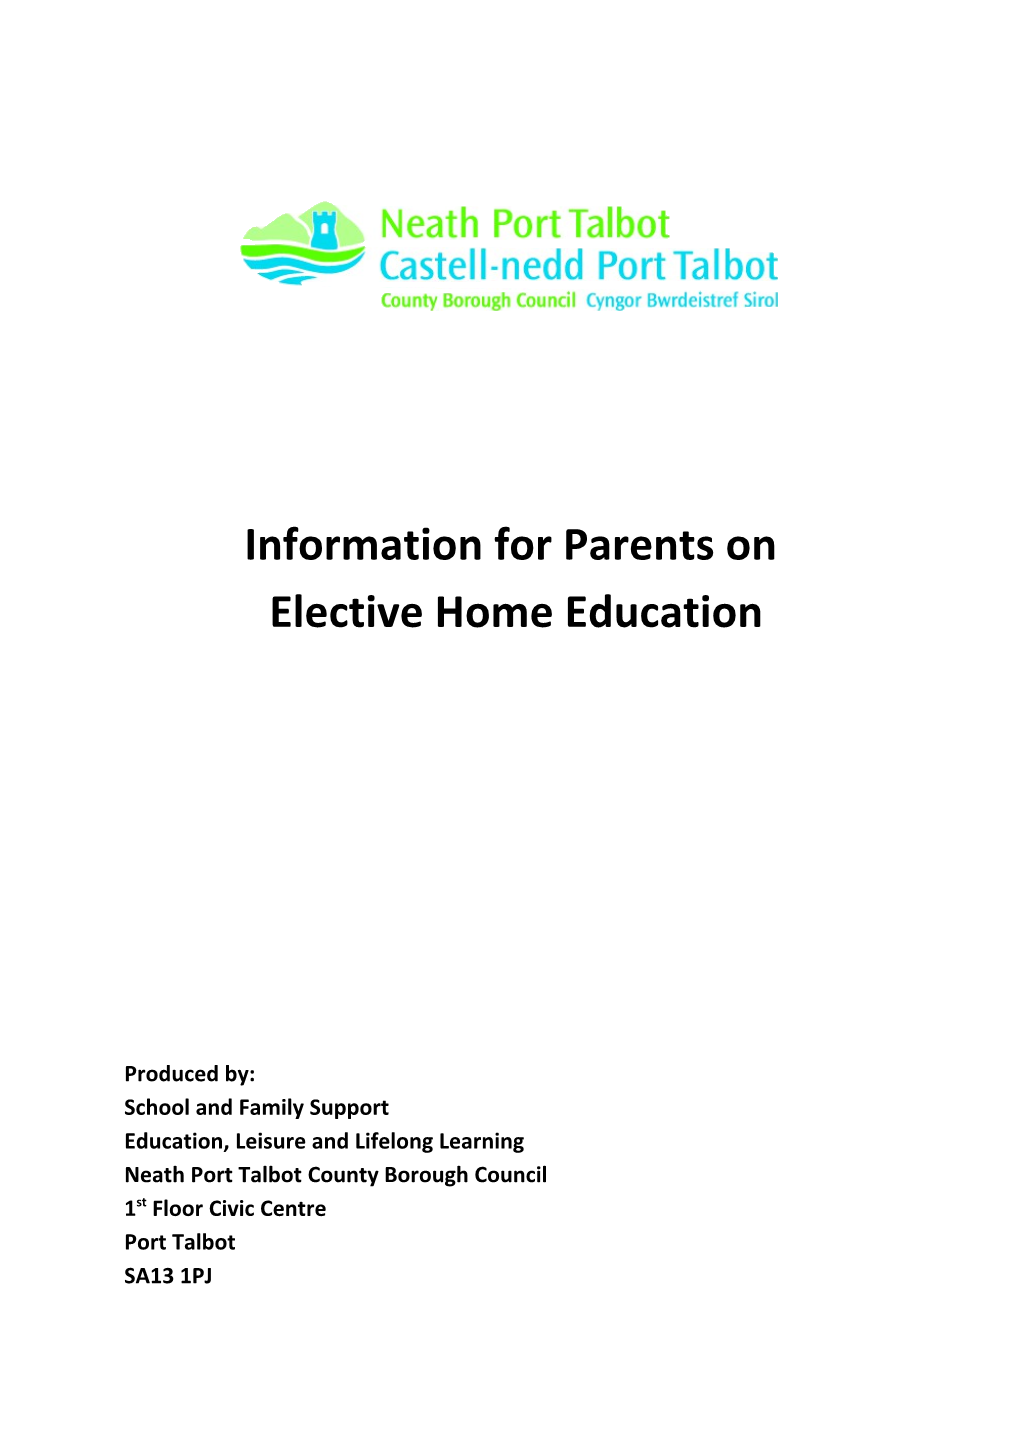 Information for Parents on Elective Home Education